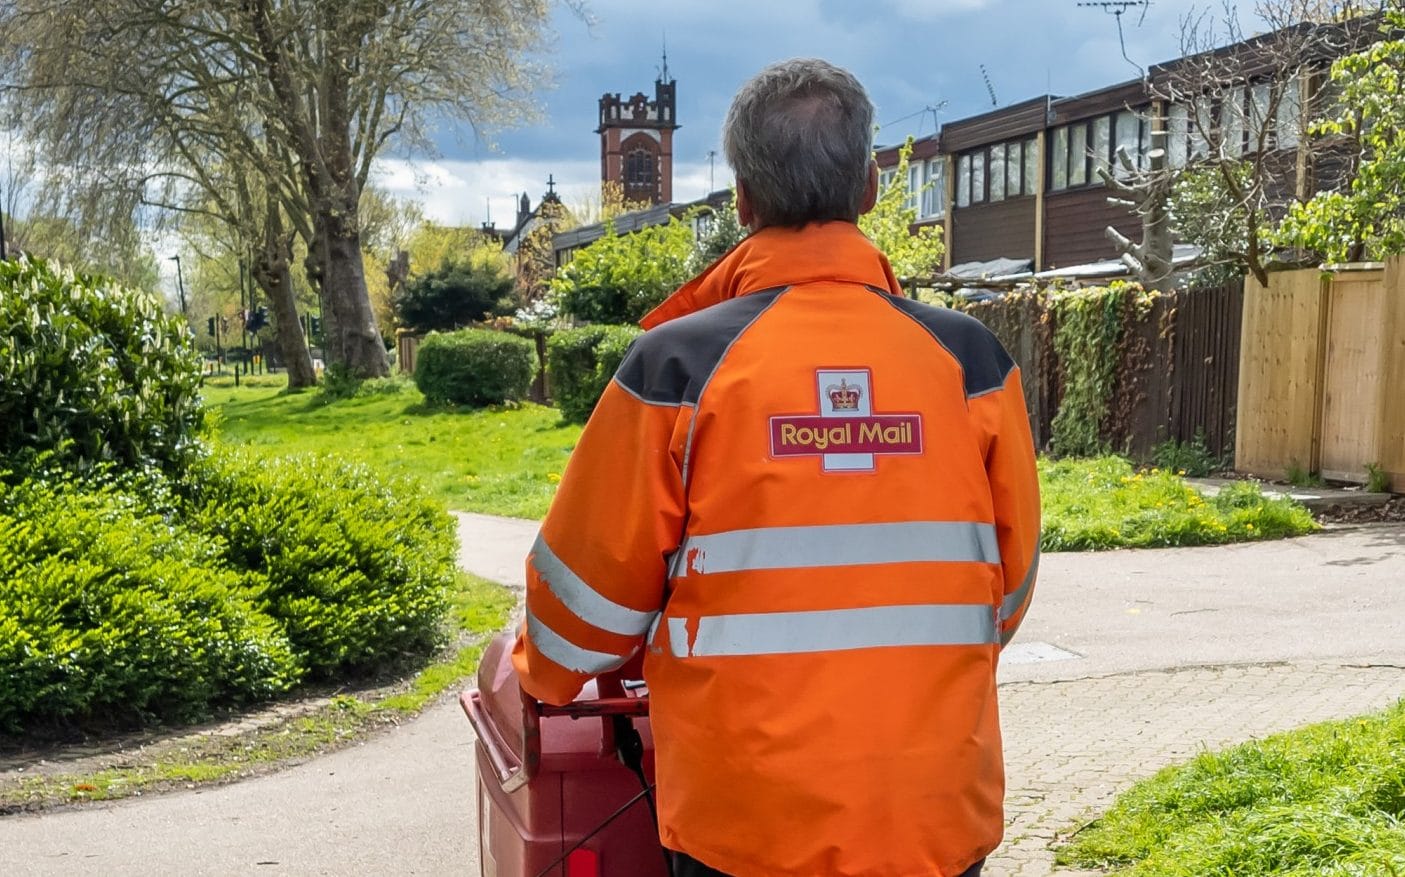 Scottish postman accused manager who couldn’t understand him of ‘being racist’